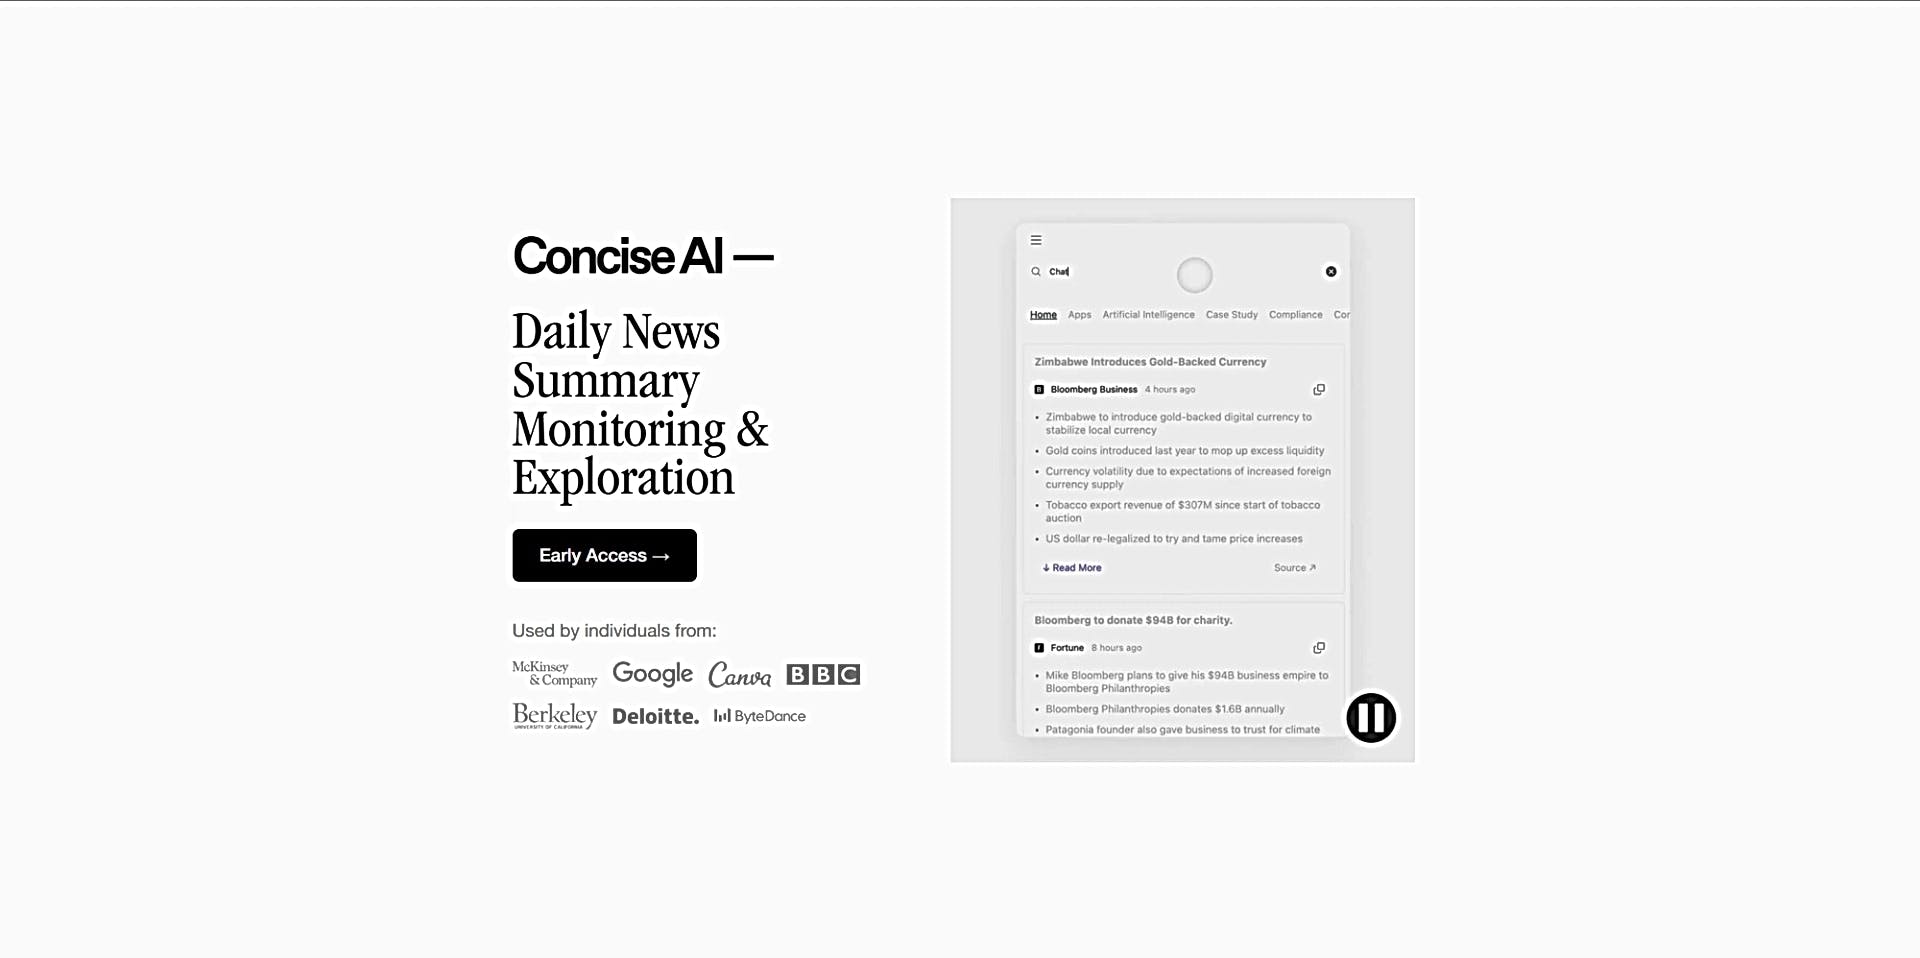 Concise AI featured